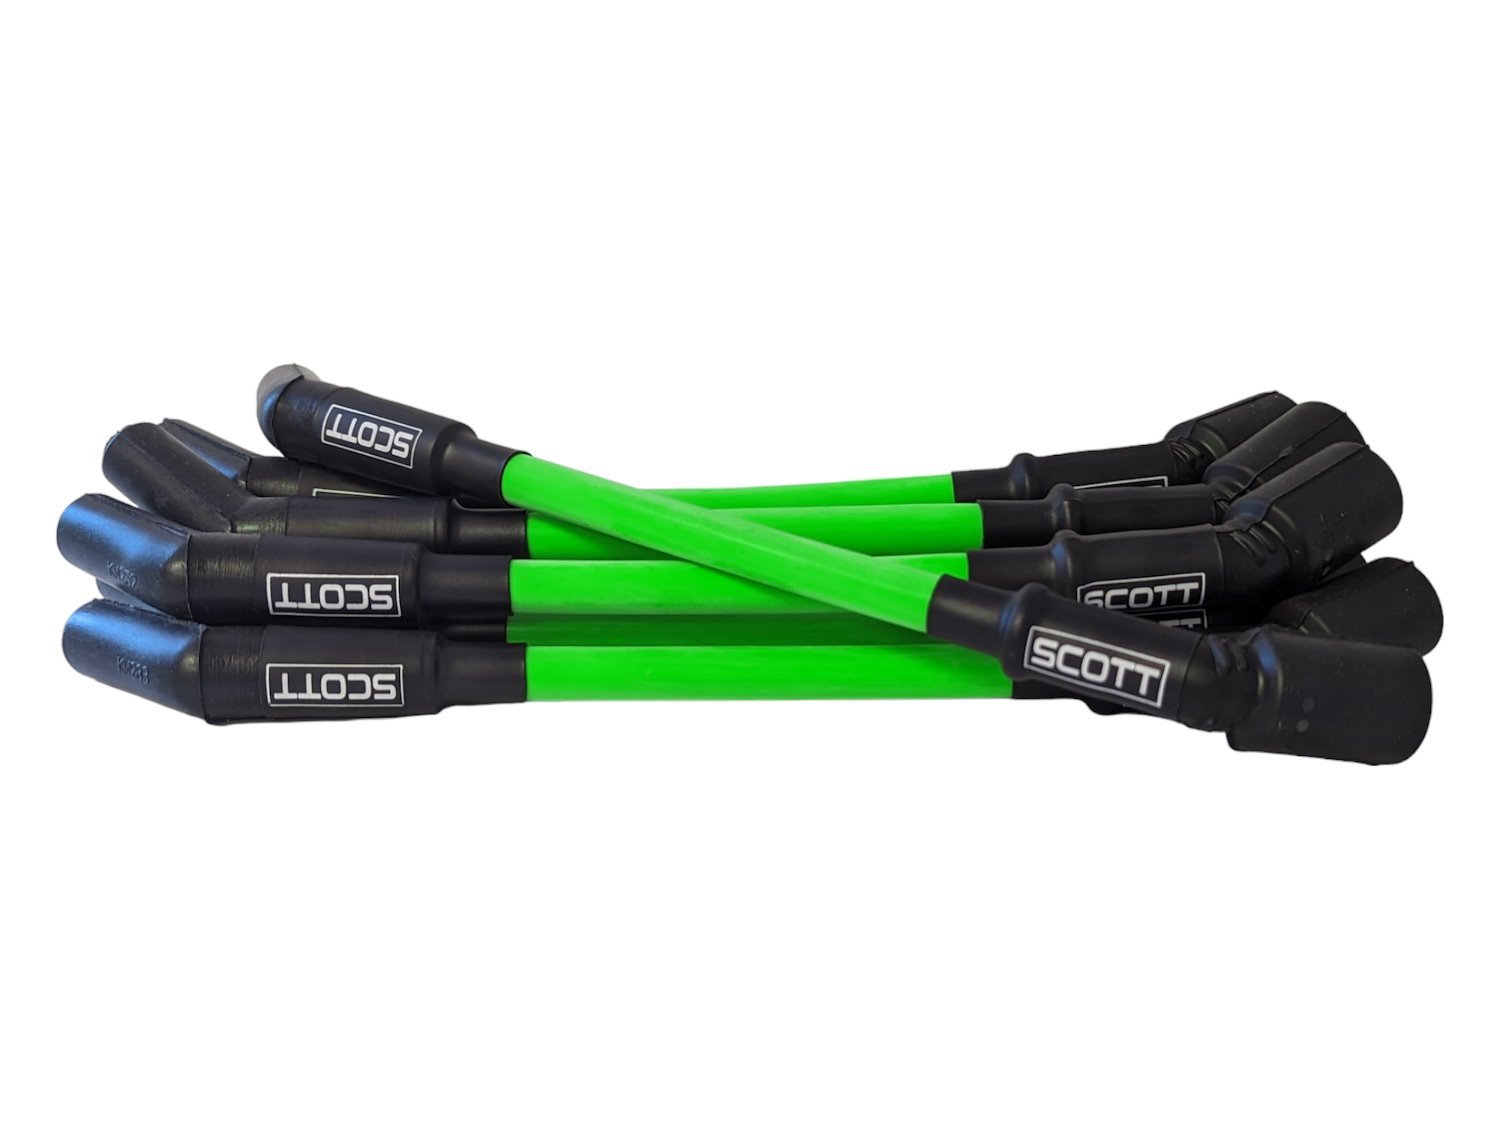 SPW-CH-LS-T-8 High-Performance Silicone-Sleeved Spark Plug Wire Set for GM LS Truck, [Fluorescent Green]